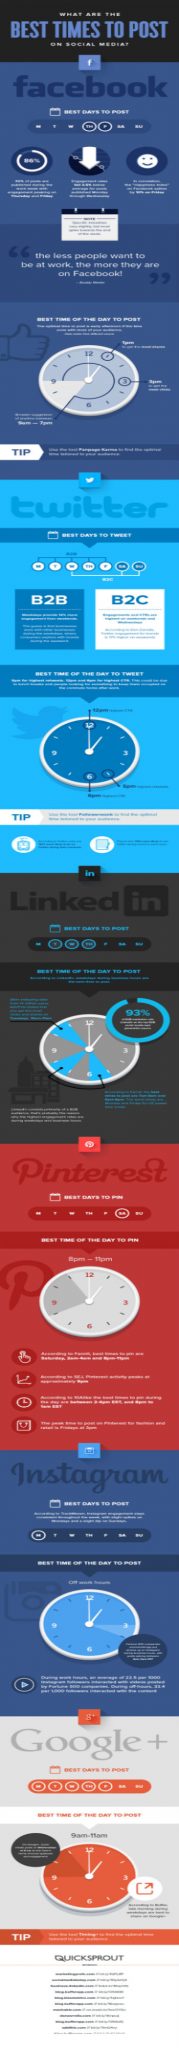 Best Time To Post On Social Media Elaborated in a better way